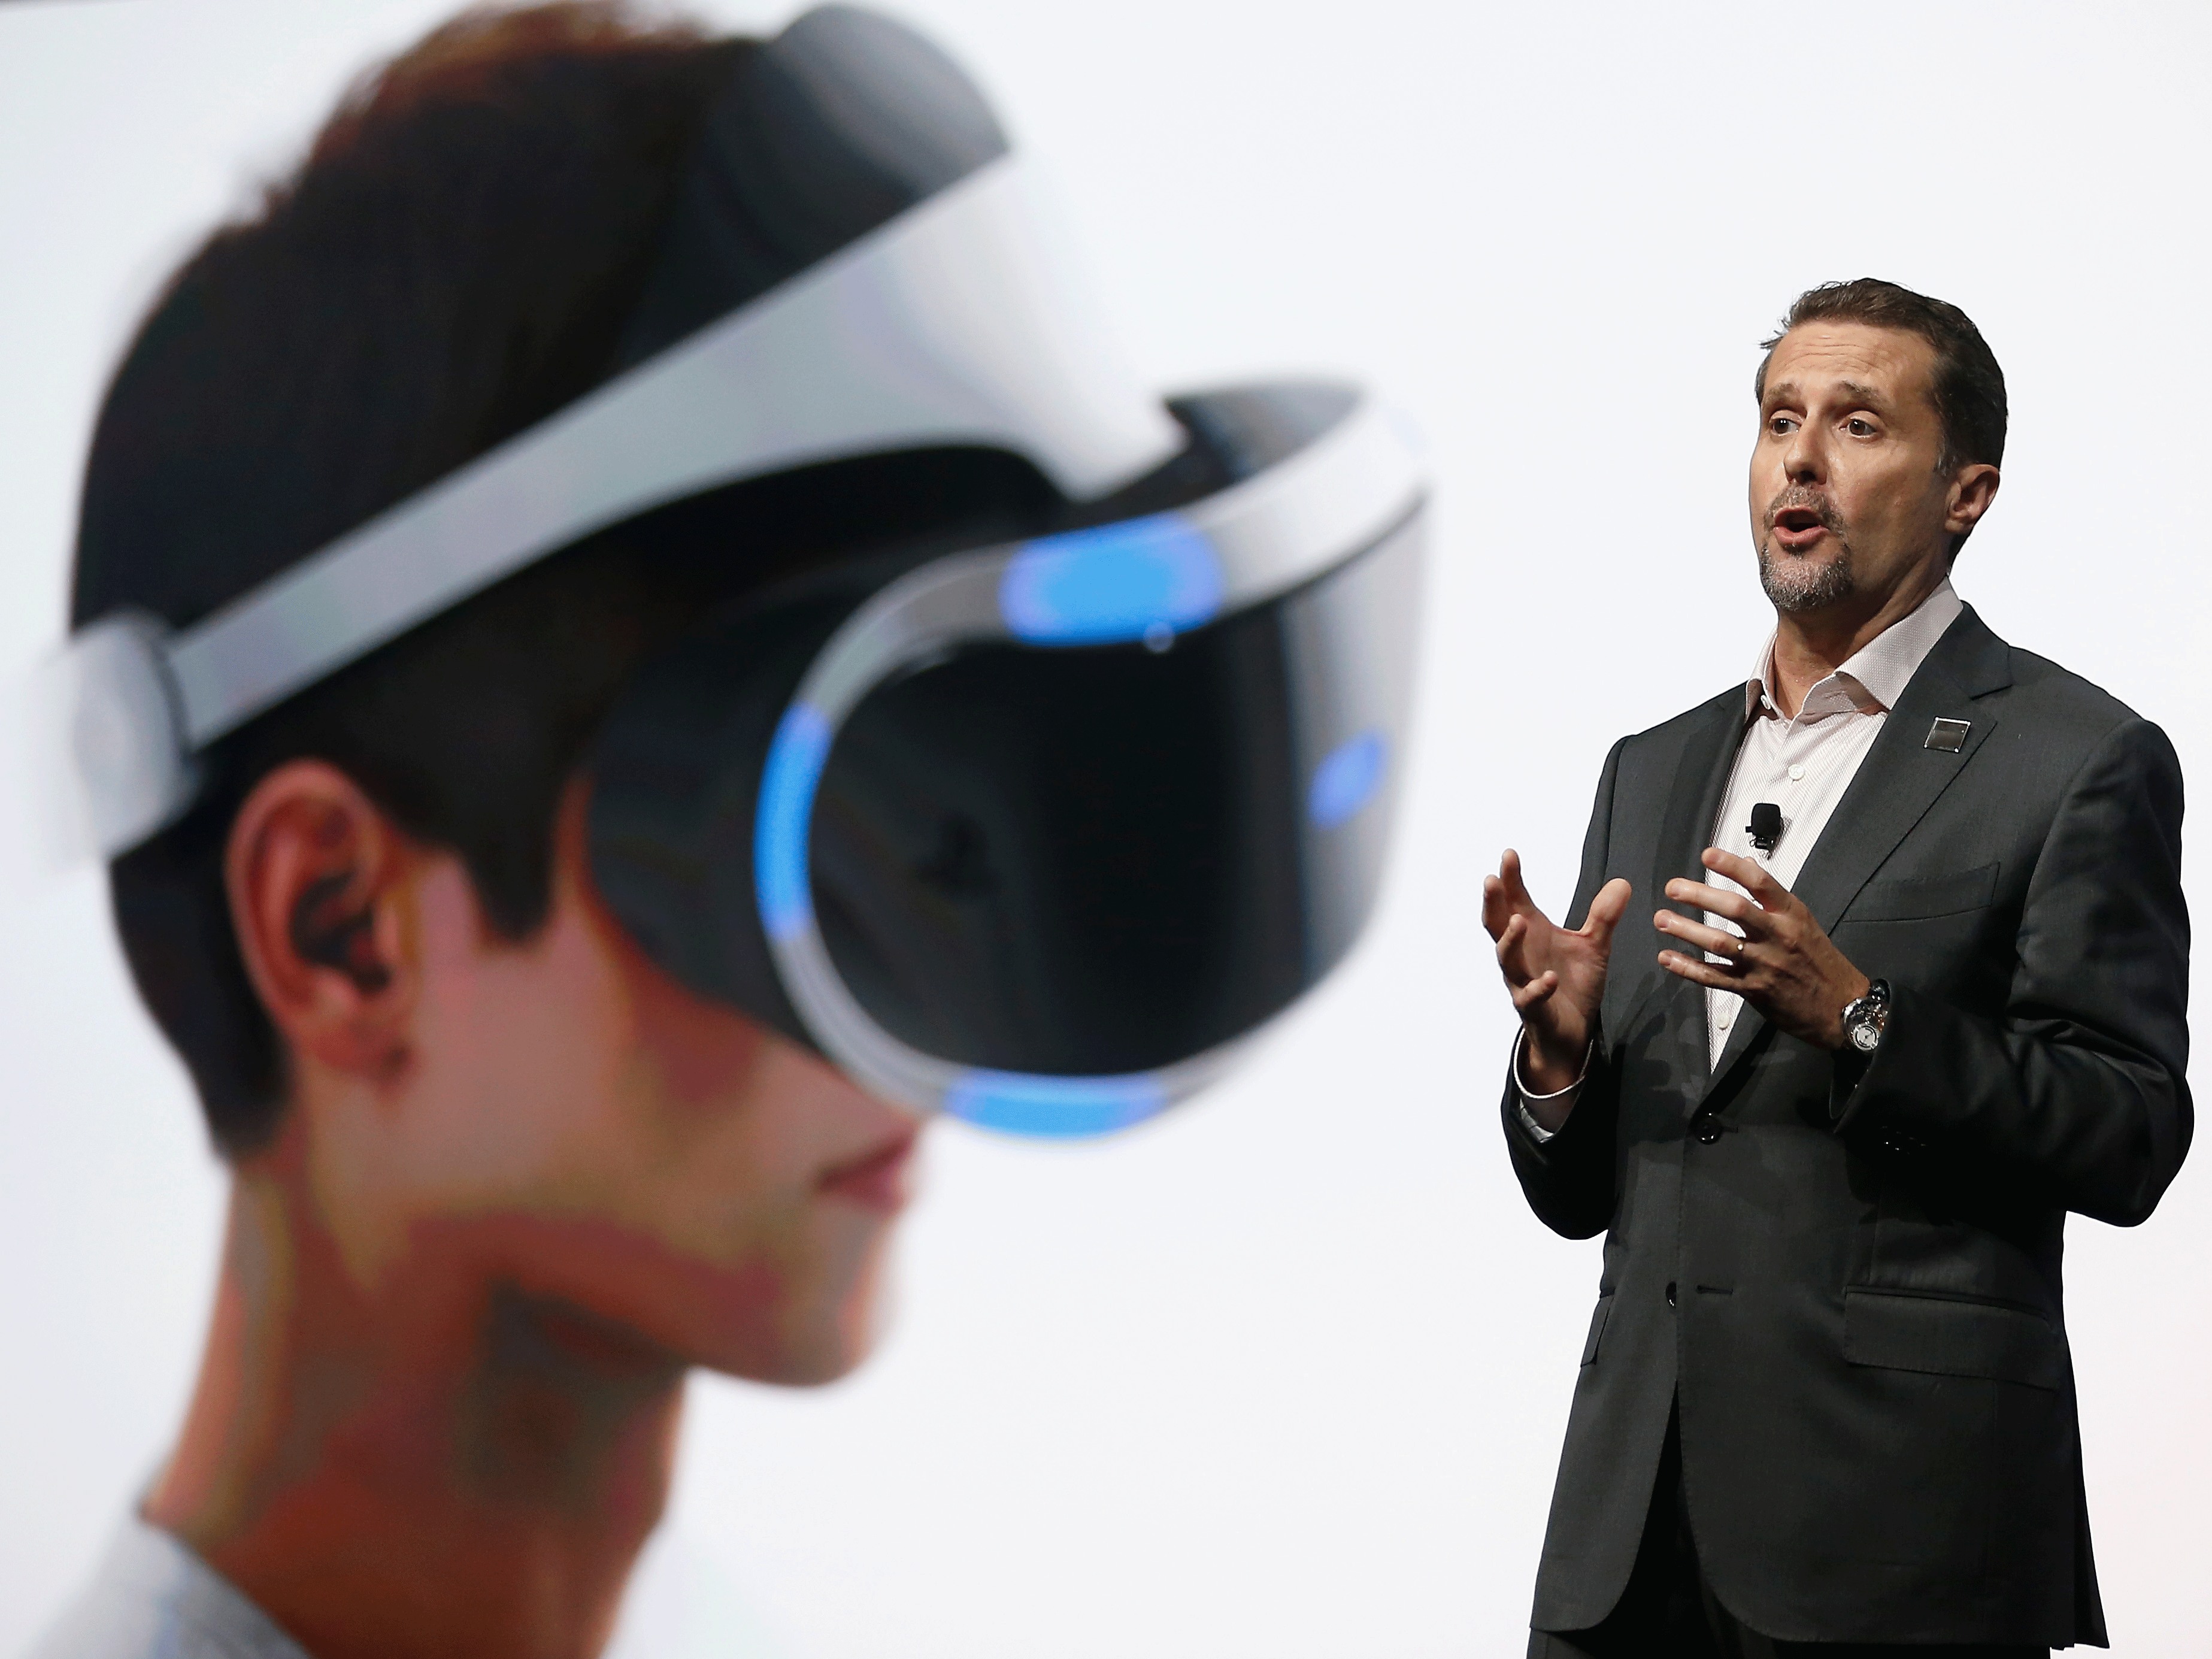 Andrew House introduces PlayStation VR at Sony's E3 press conference in June 2015